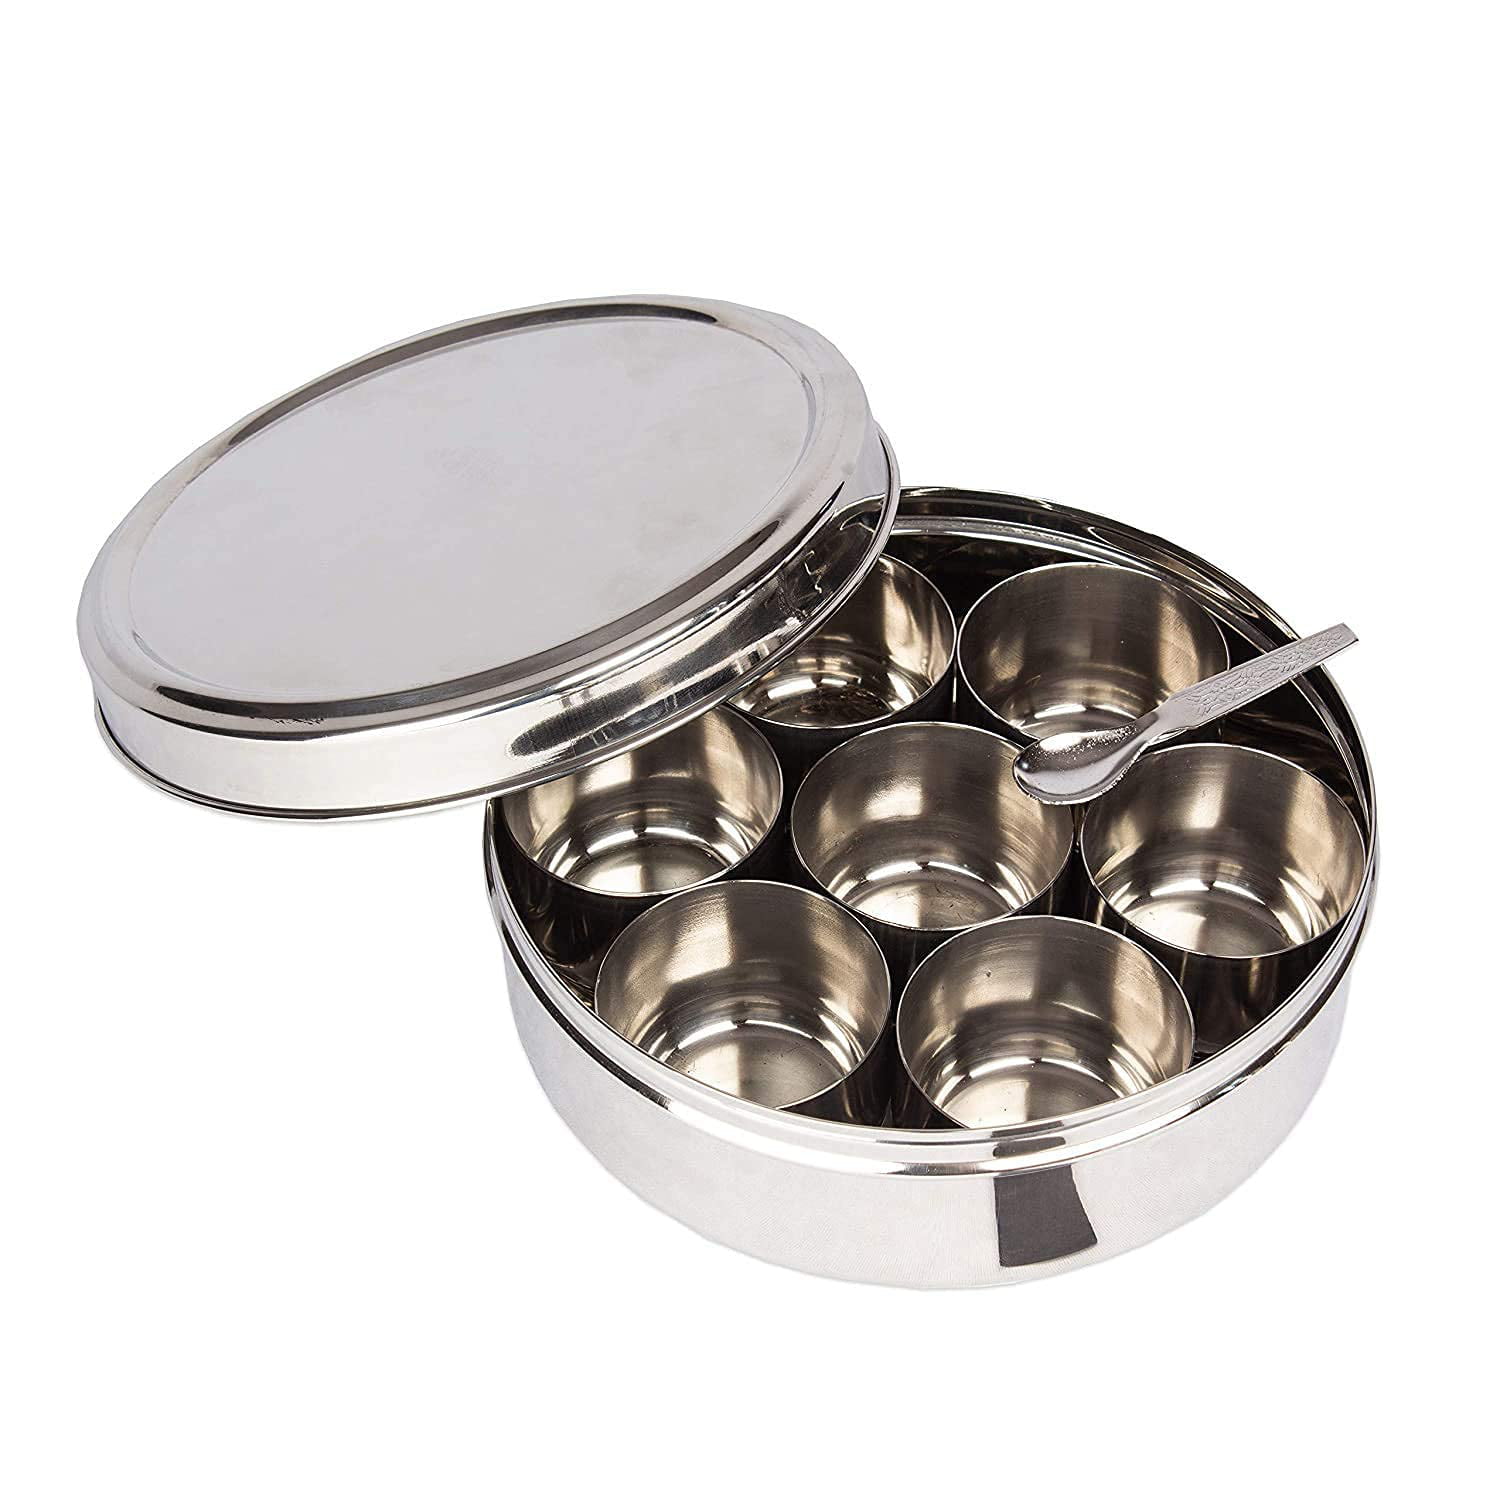 Christmas Gifts 7 Compartments Masala Box Masala Dabba Stainless Steel Silver Spice Box/Masala Dabba/Spice Box with Spoon Stainless Steel- 7 Pots with Individual Clear See || Spice Container 